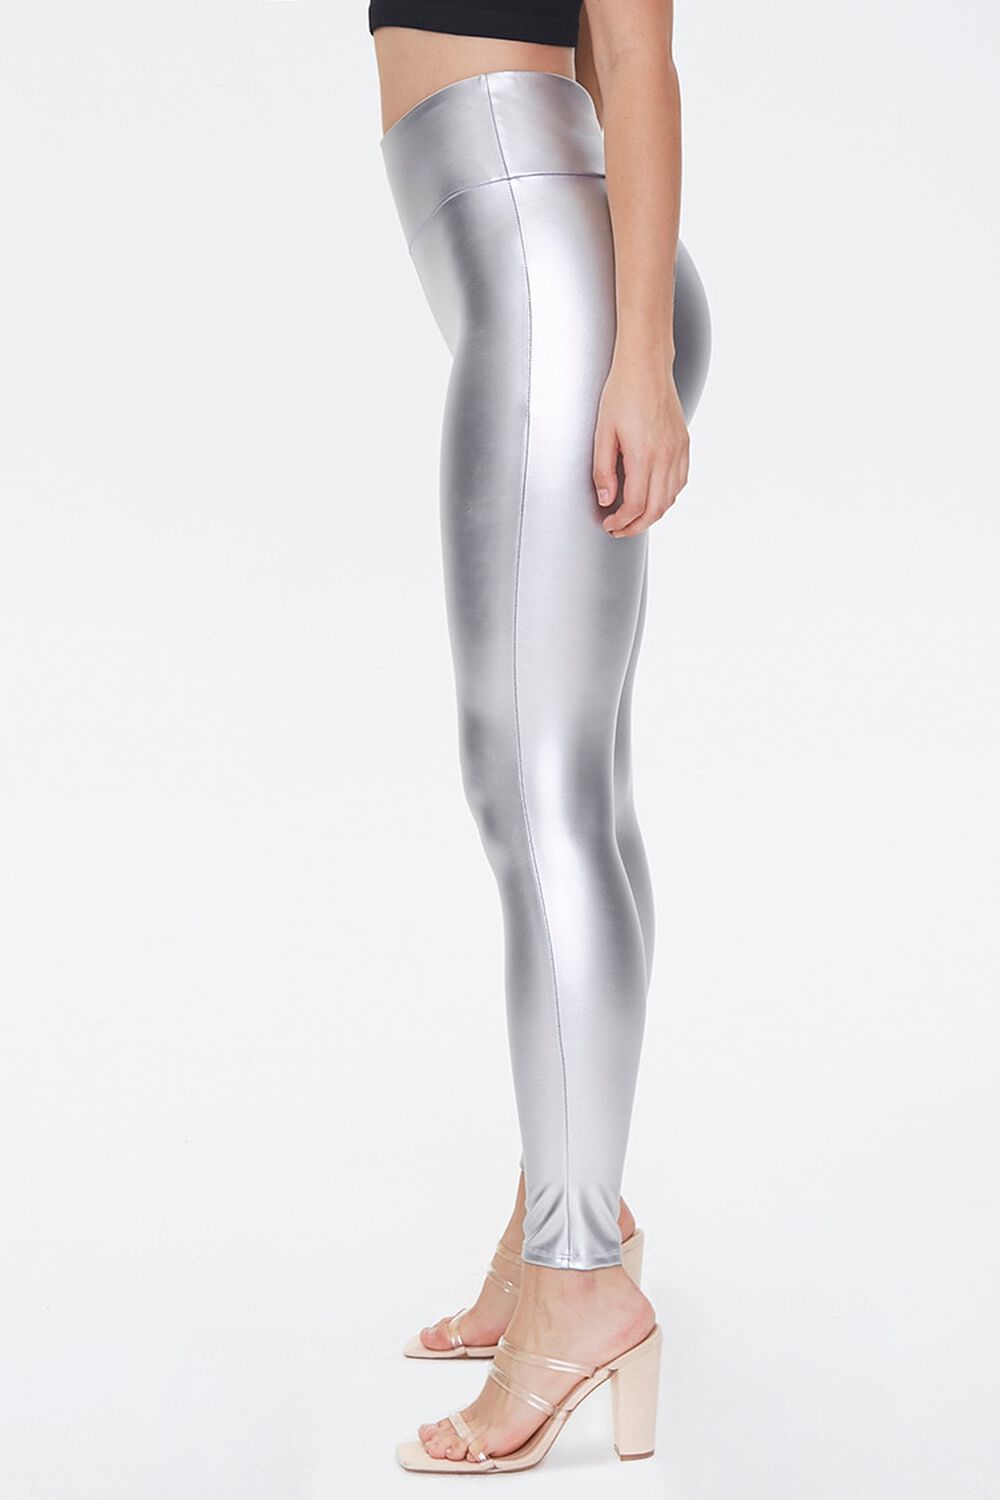 SILVER Faux Leather High-Rise Leggings, image 3